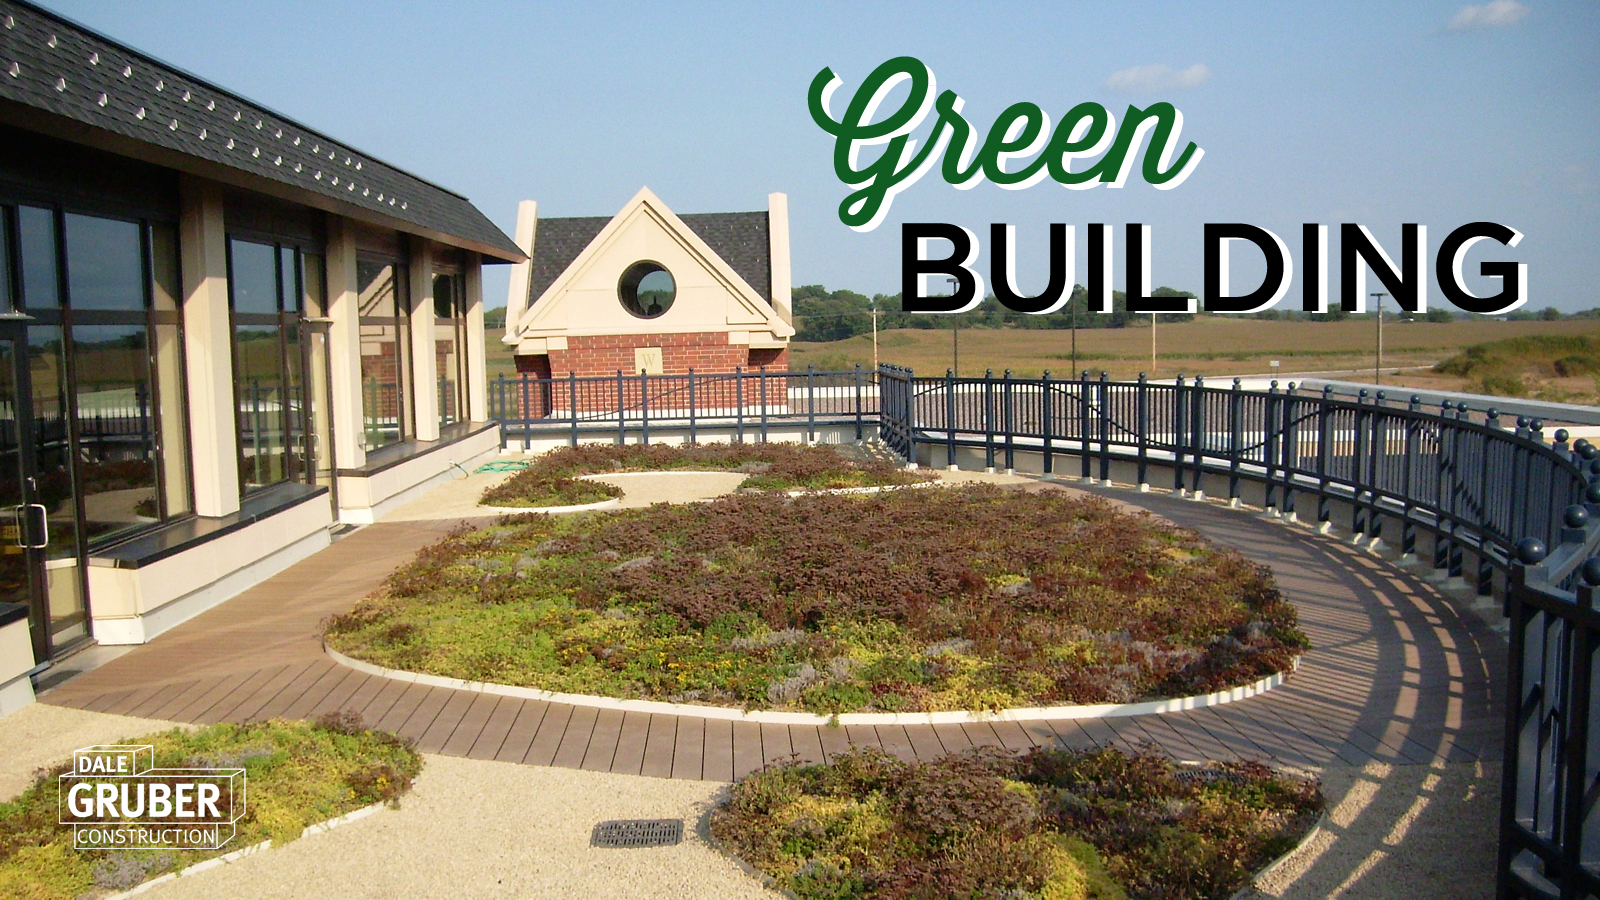 Building Green with DGC!